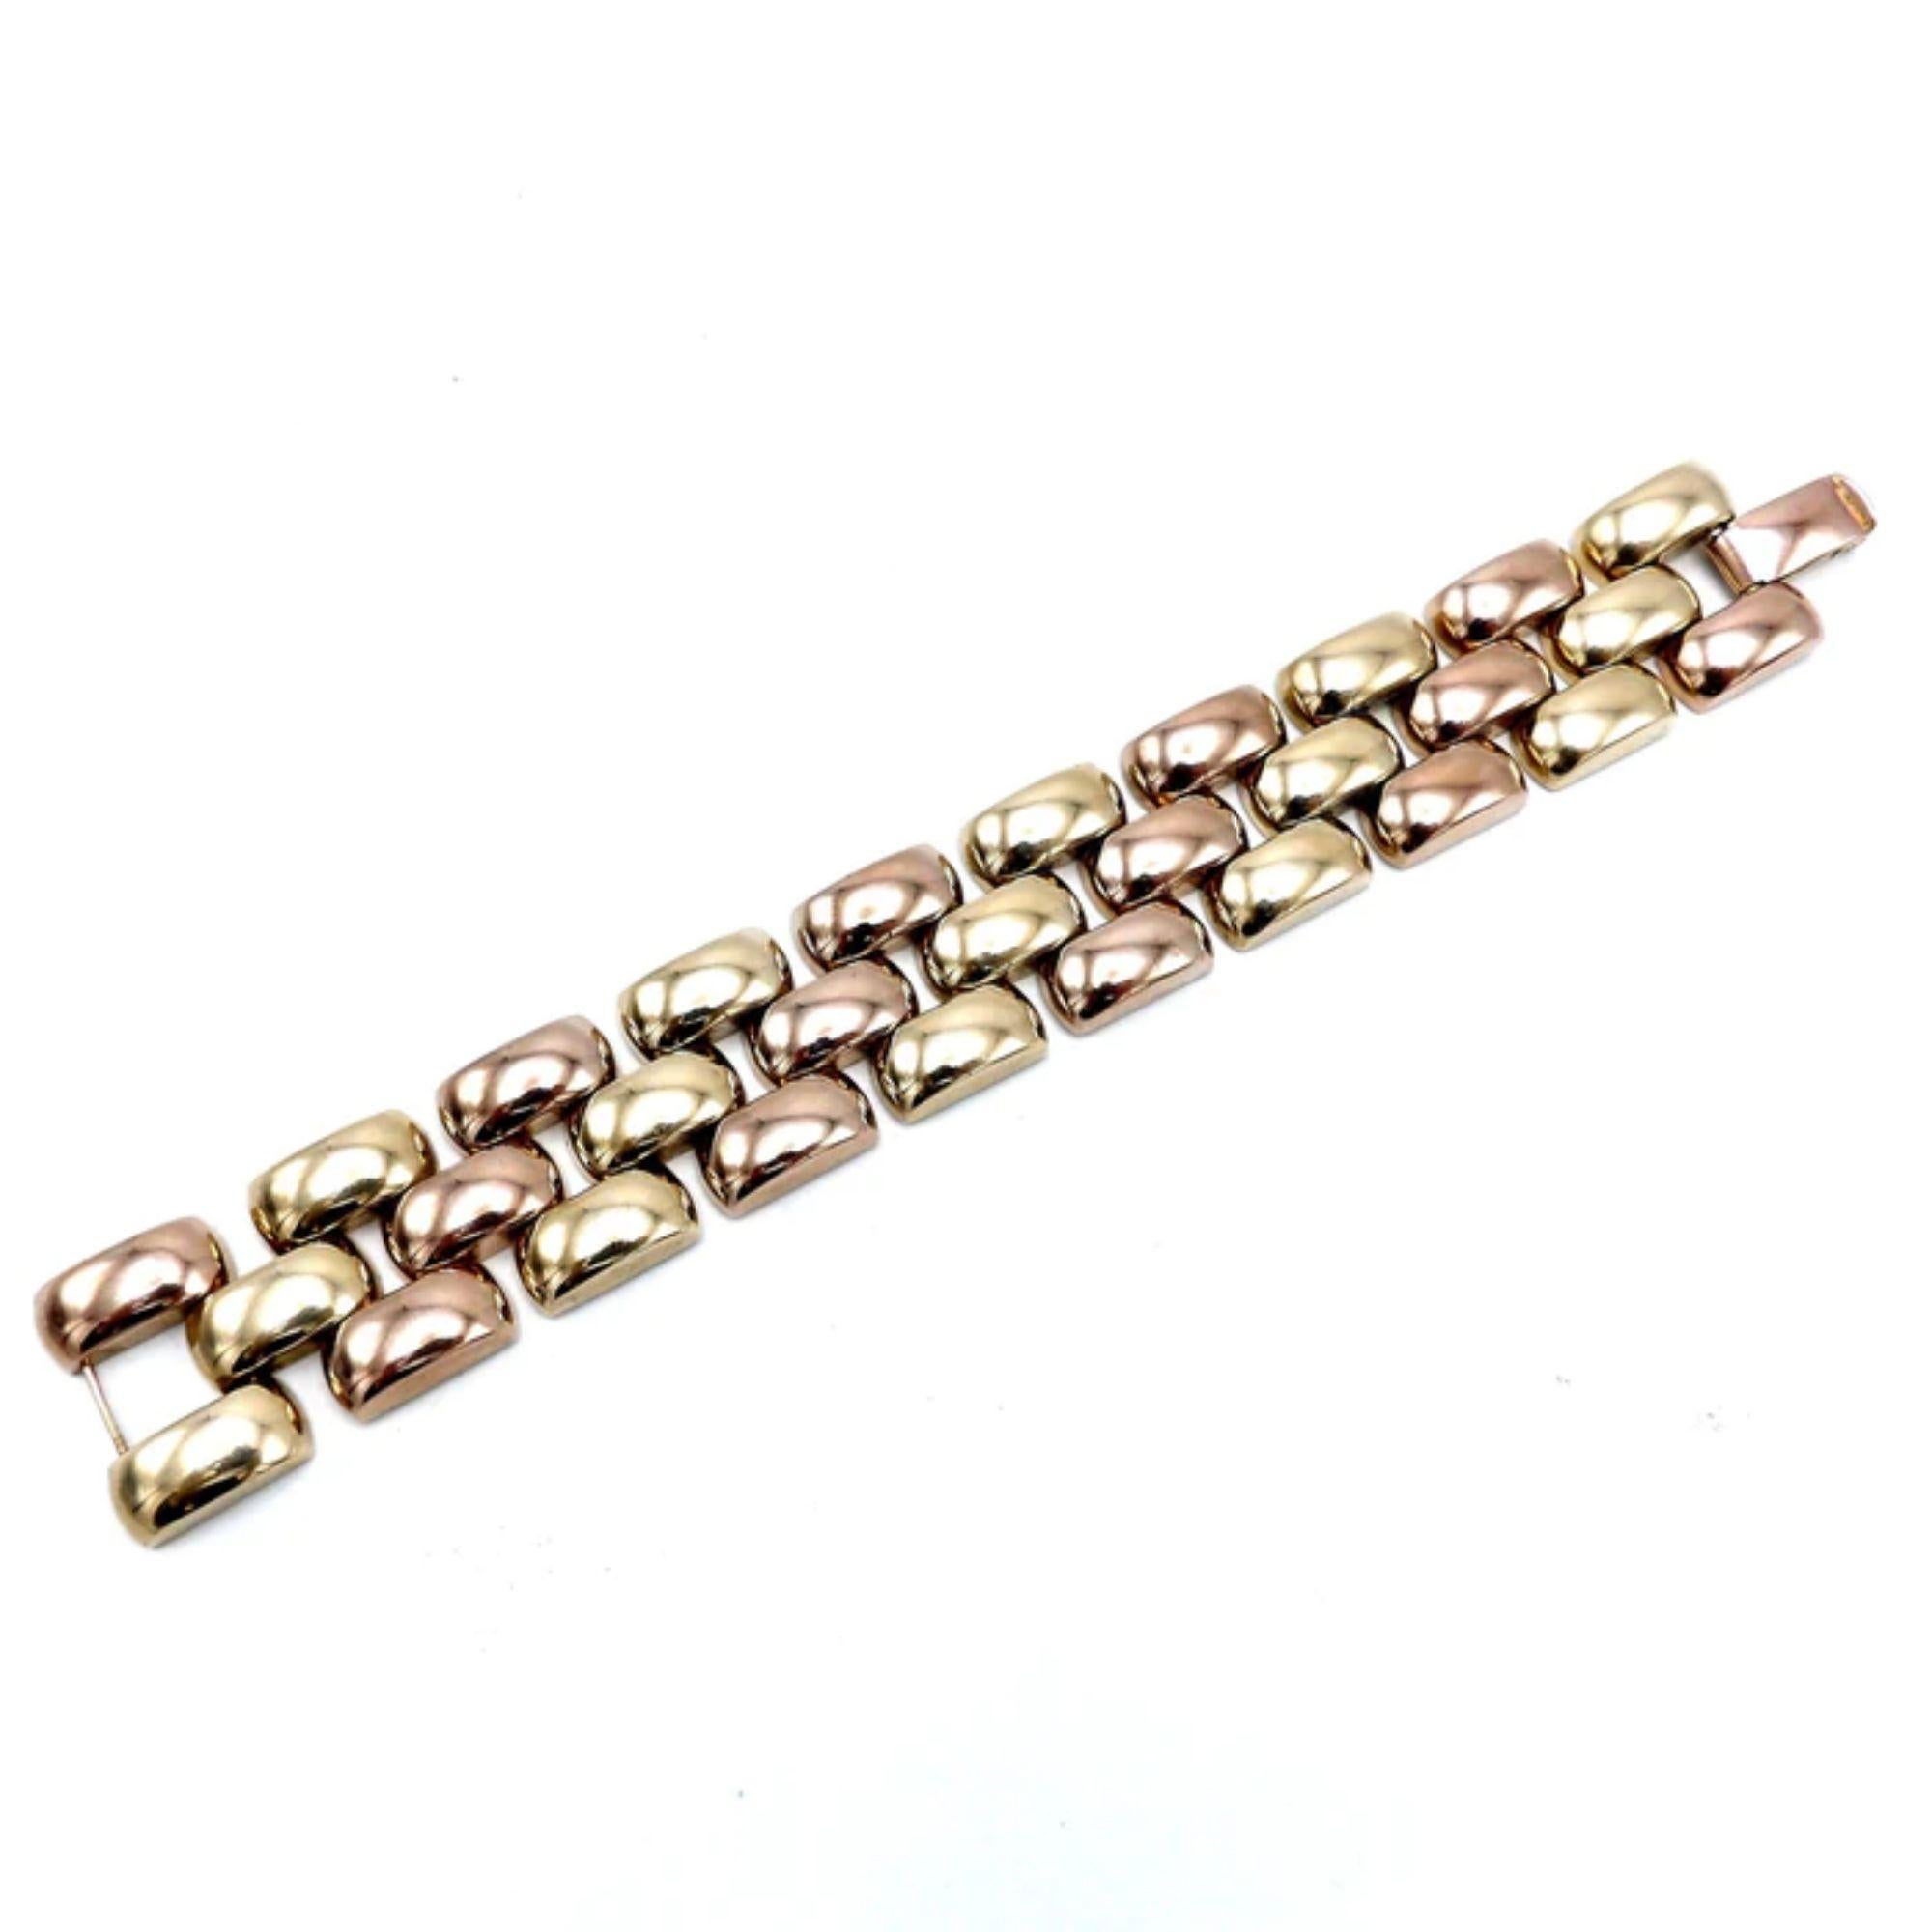 This Retro 14K rose and yellow gold linked bracelet, has a geometric design indicative of mid-20th century jewelry. Retro jewelry design was influenced by the culture and aesthetics of World War II. This piece has an air of history, with its